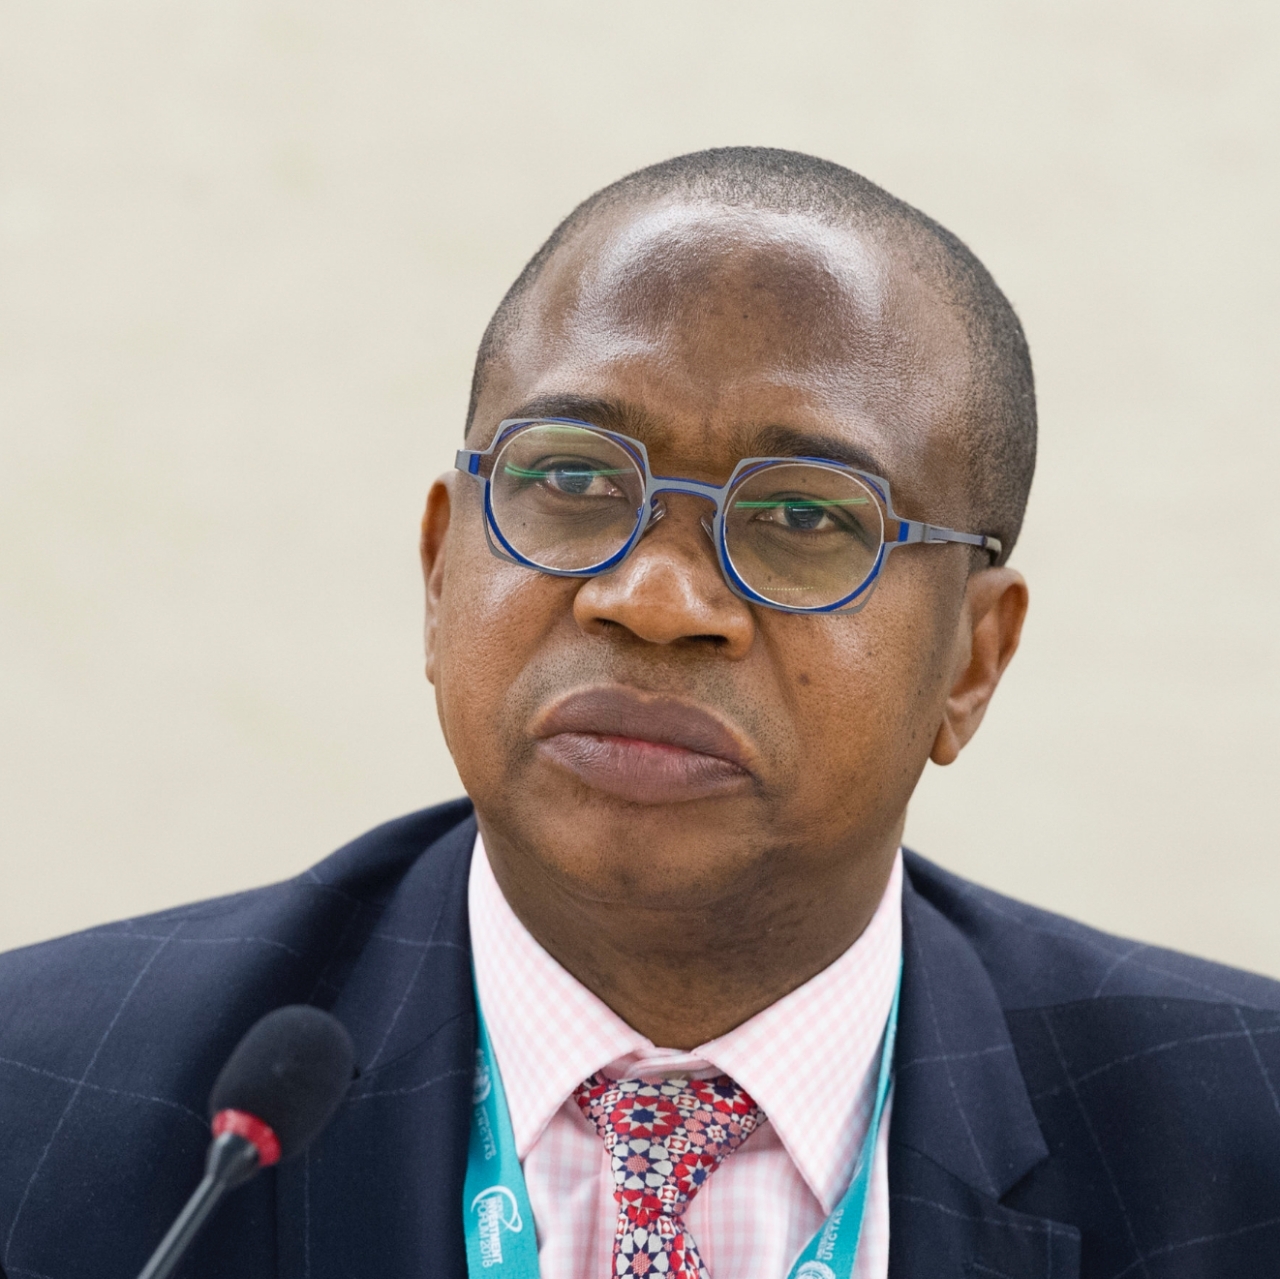 Mthuli Ncube, Zimbabwe's Minister of Finance and Economic Development attends the Ministerial Roundtable: Entrepreneurship for Sustainable Development » during the World Investment Forum 2018, palais des Nations. 25 October 2018. UNCTAD (Picture via United Nations Conference on Trade and Development / Violaine Martin, CC BY-SA 2.0 , via Wikimedia Commons)